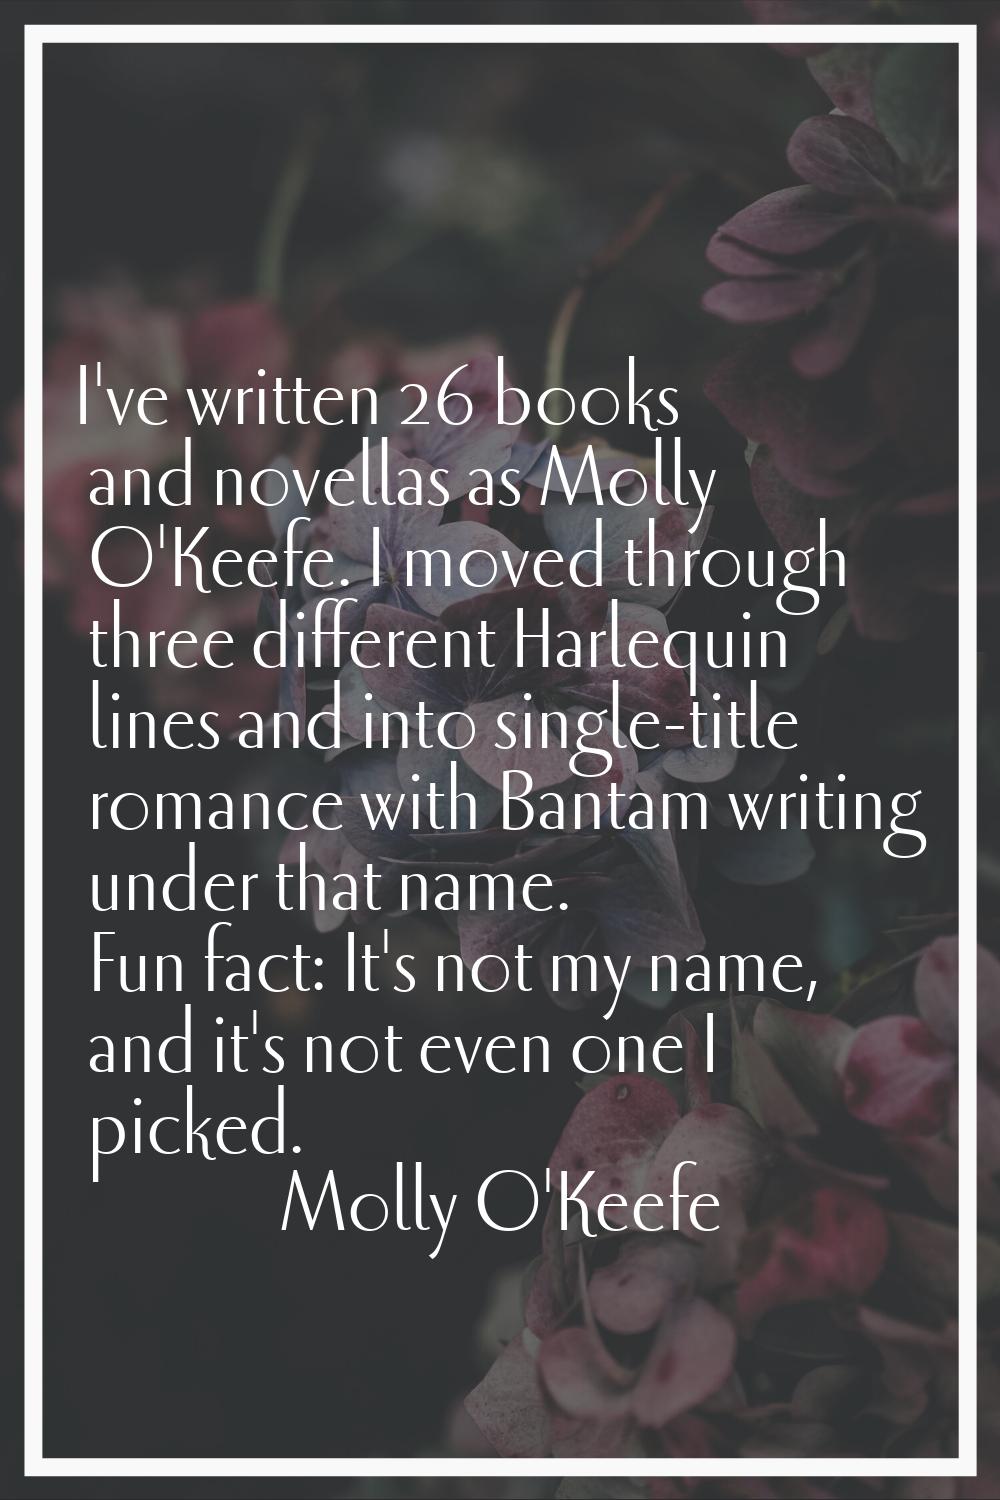 I've written 26 books and novellas as Molly O'Keefe. I moved through three different Harlequin line